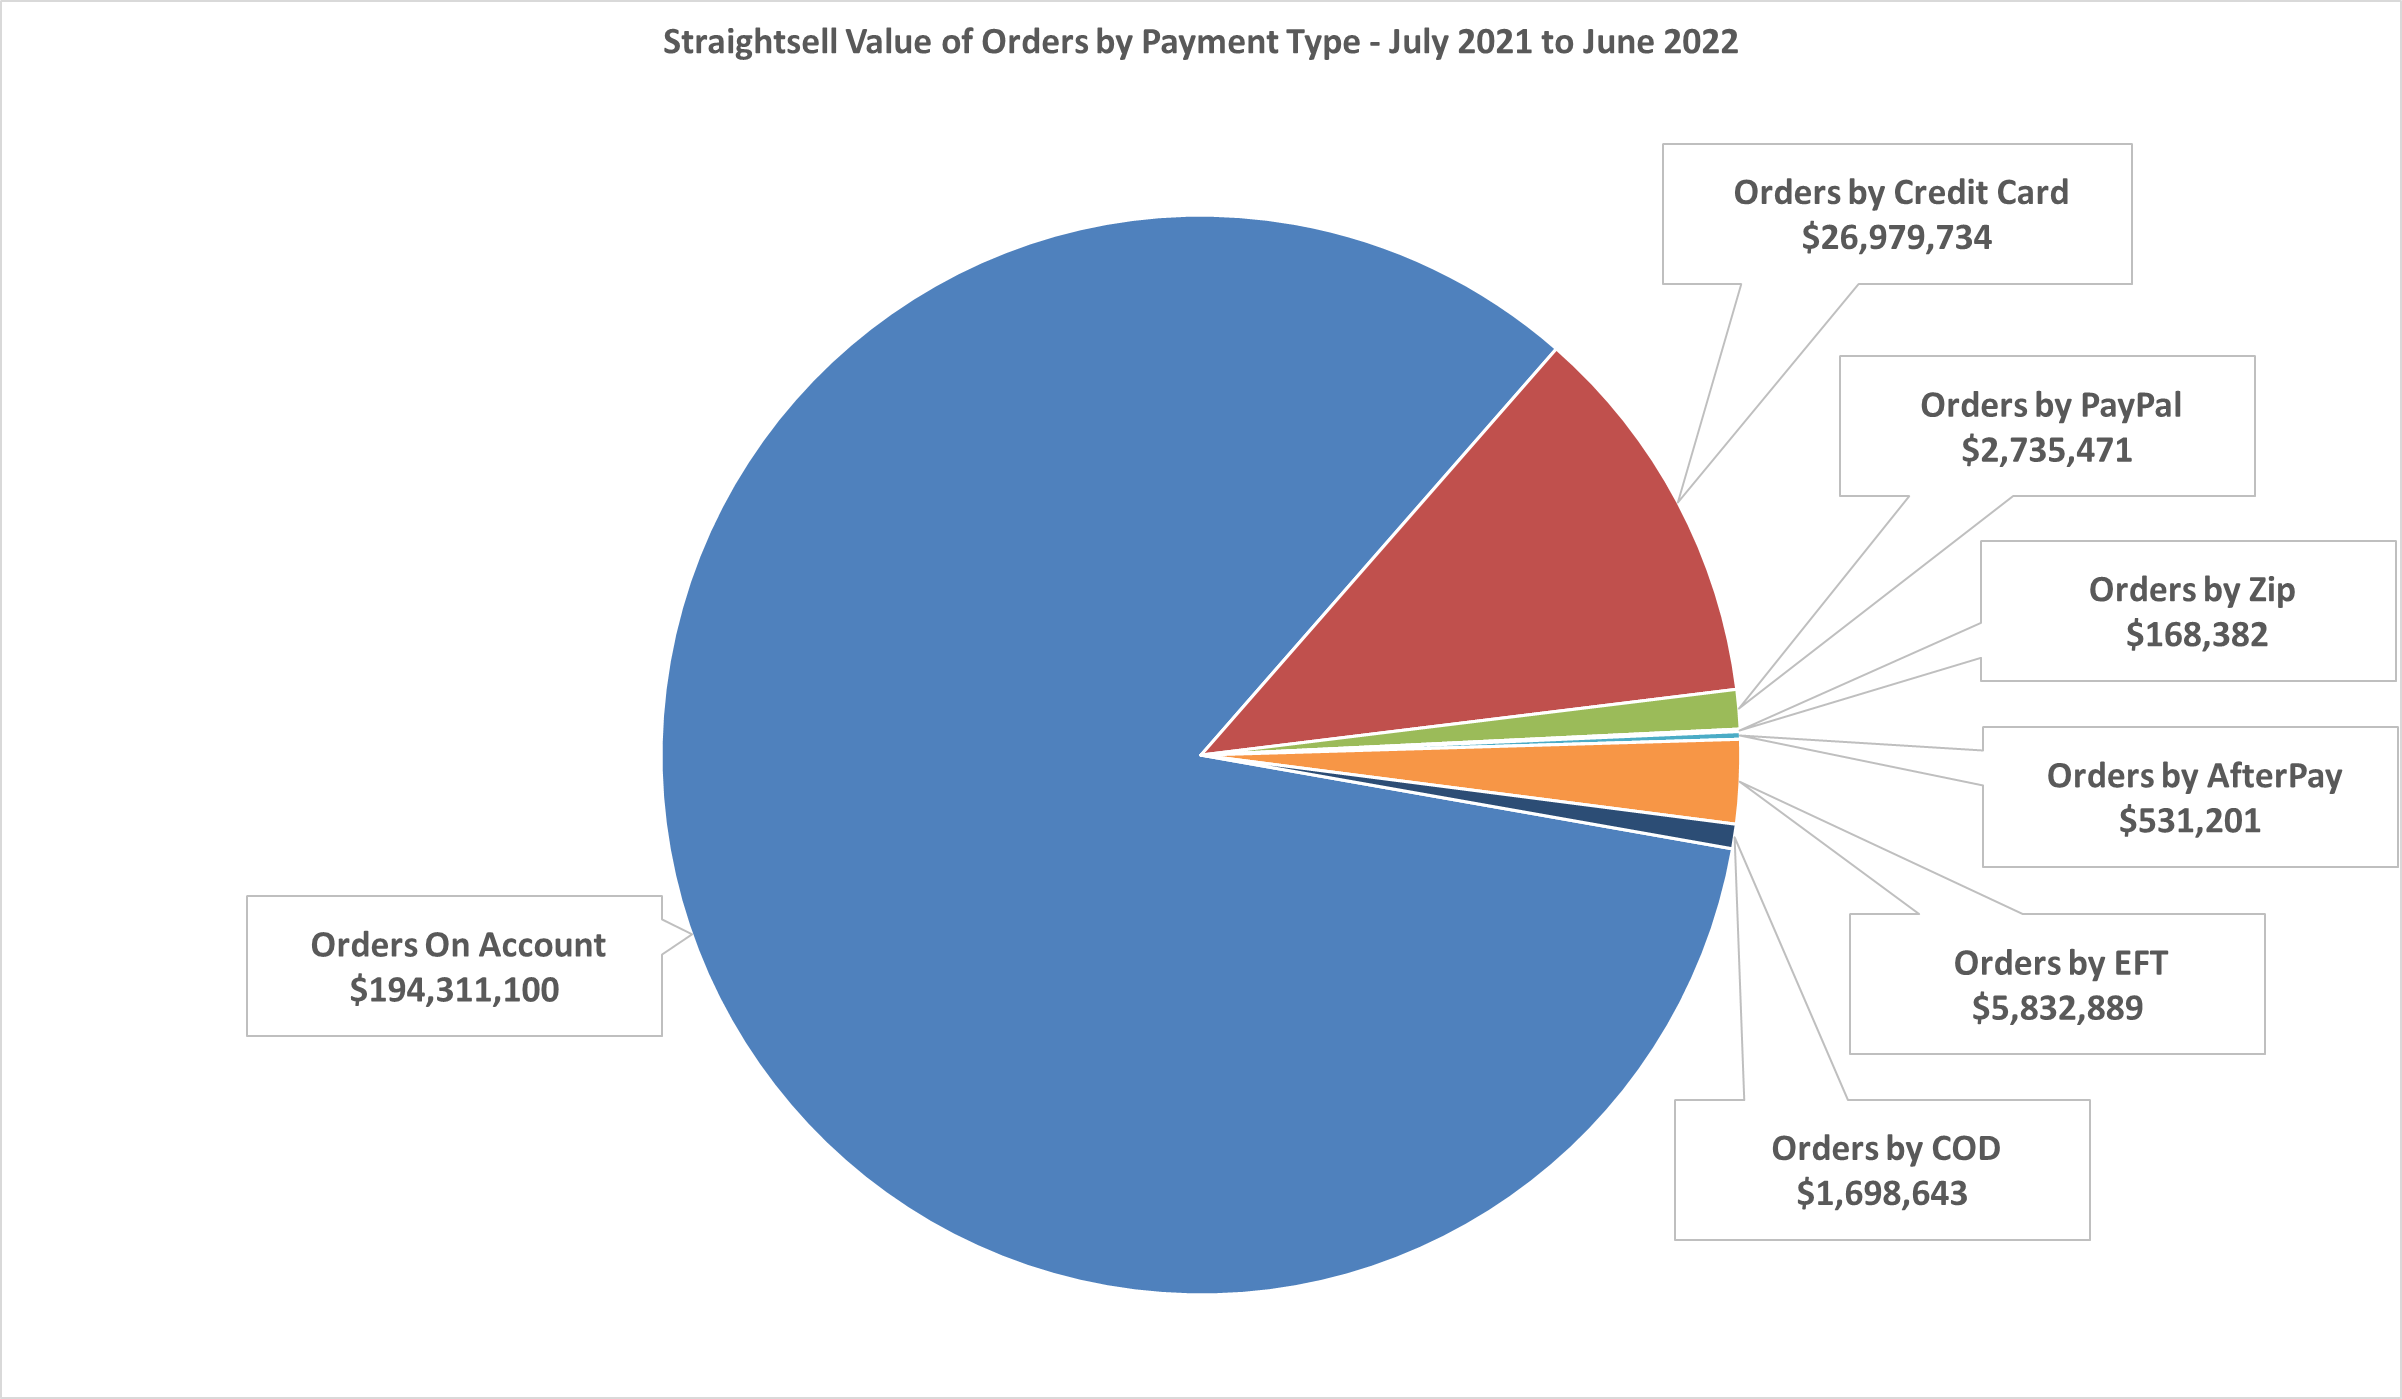 Straightsell Value of Orders by Payment Type - July 2021 thru June 2022